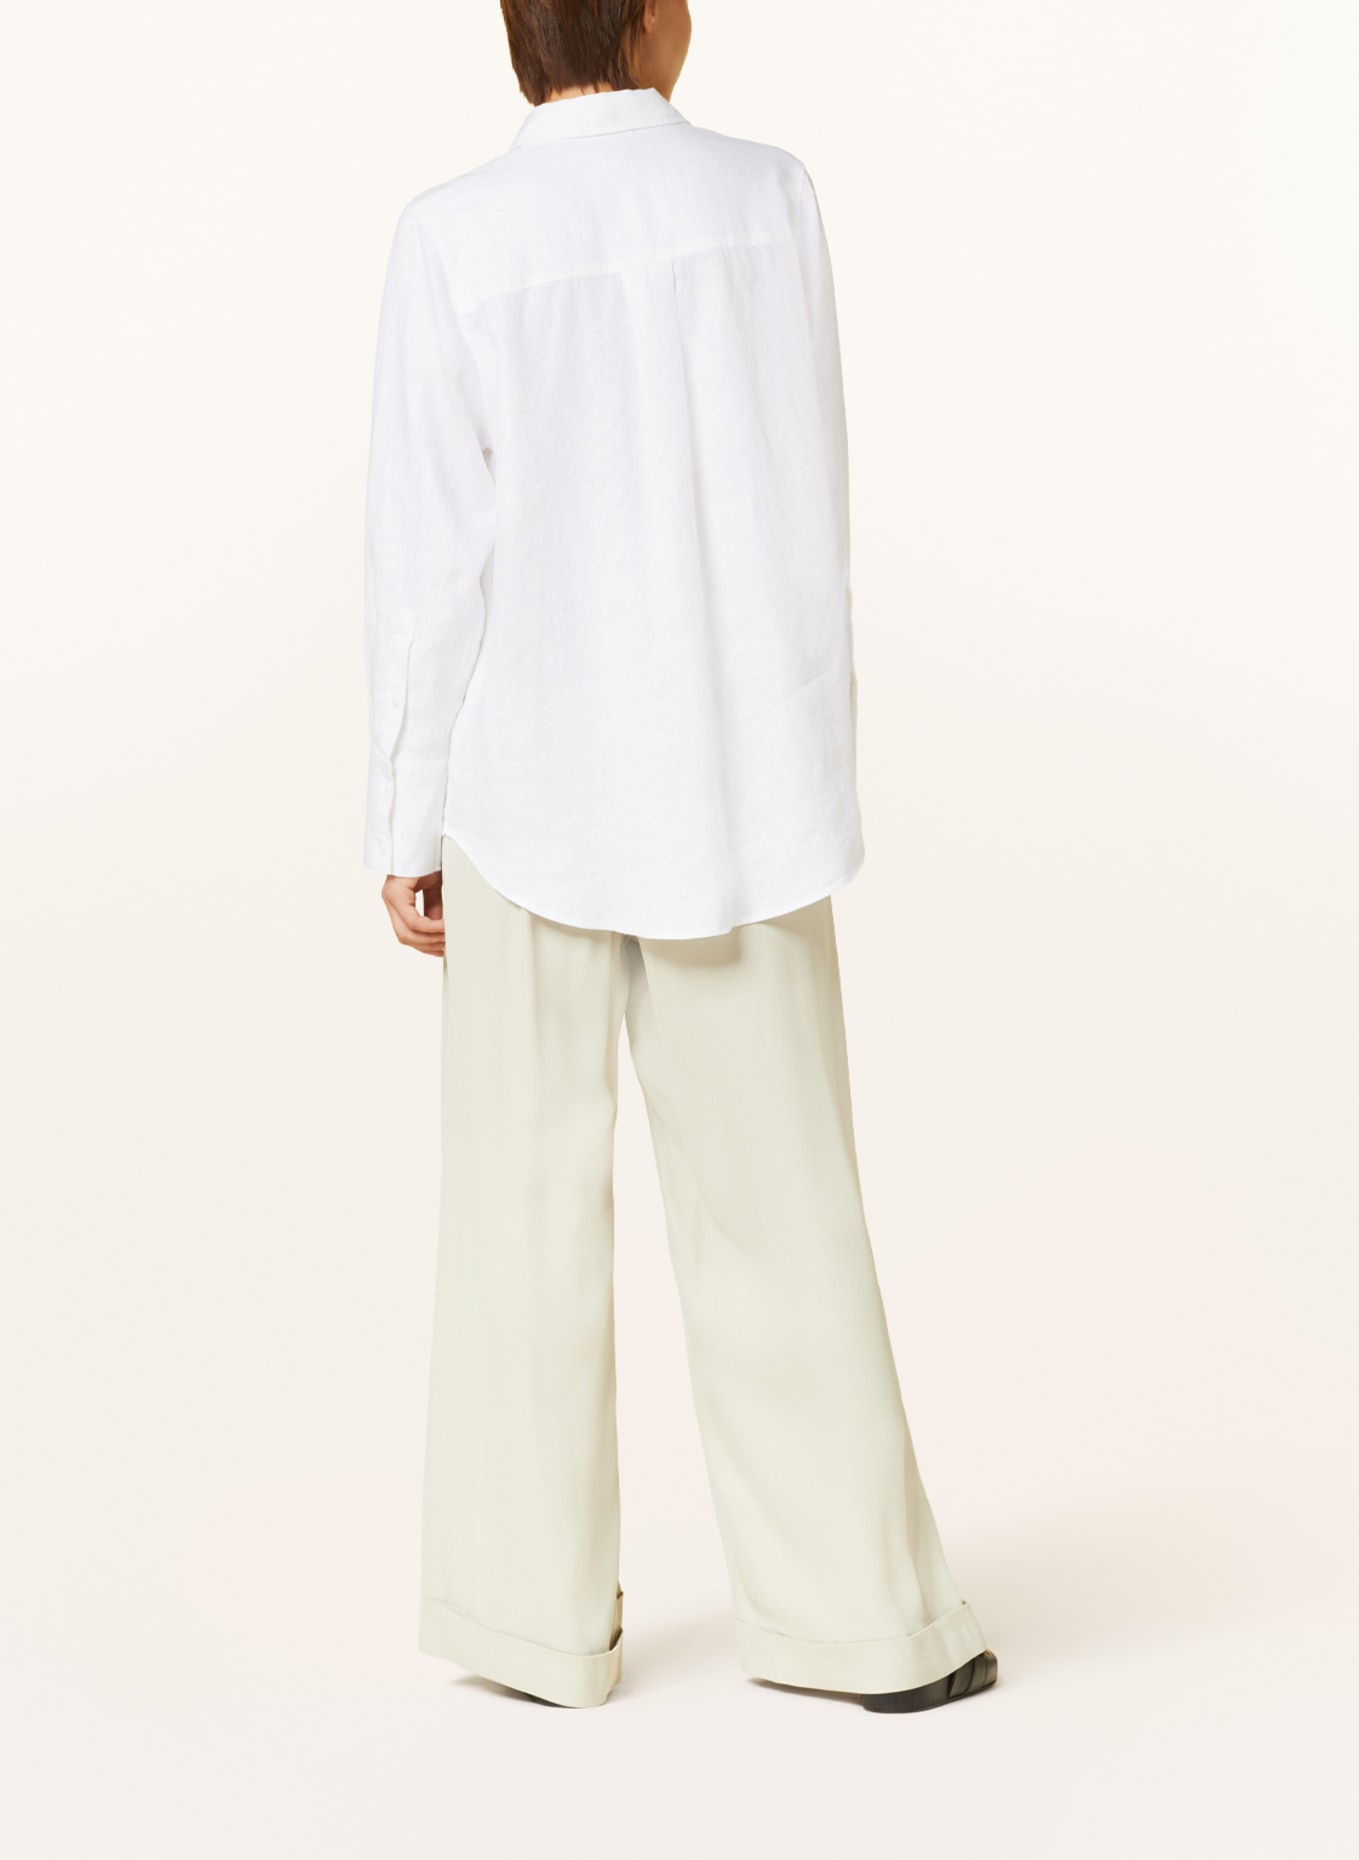 COS Shirt blouse made of linen, Color: WHITE (Image 3)